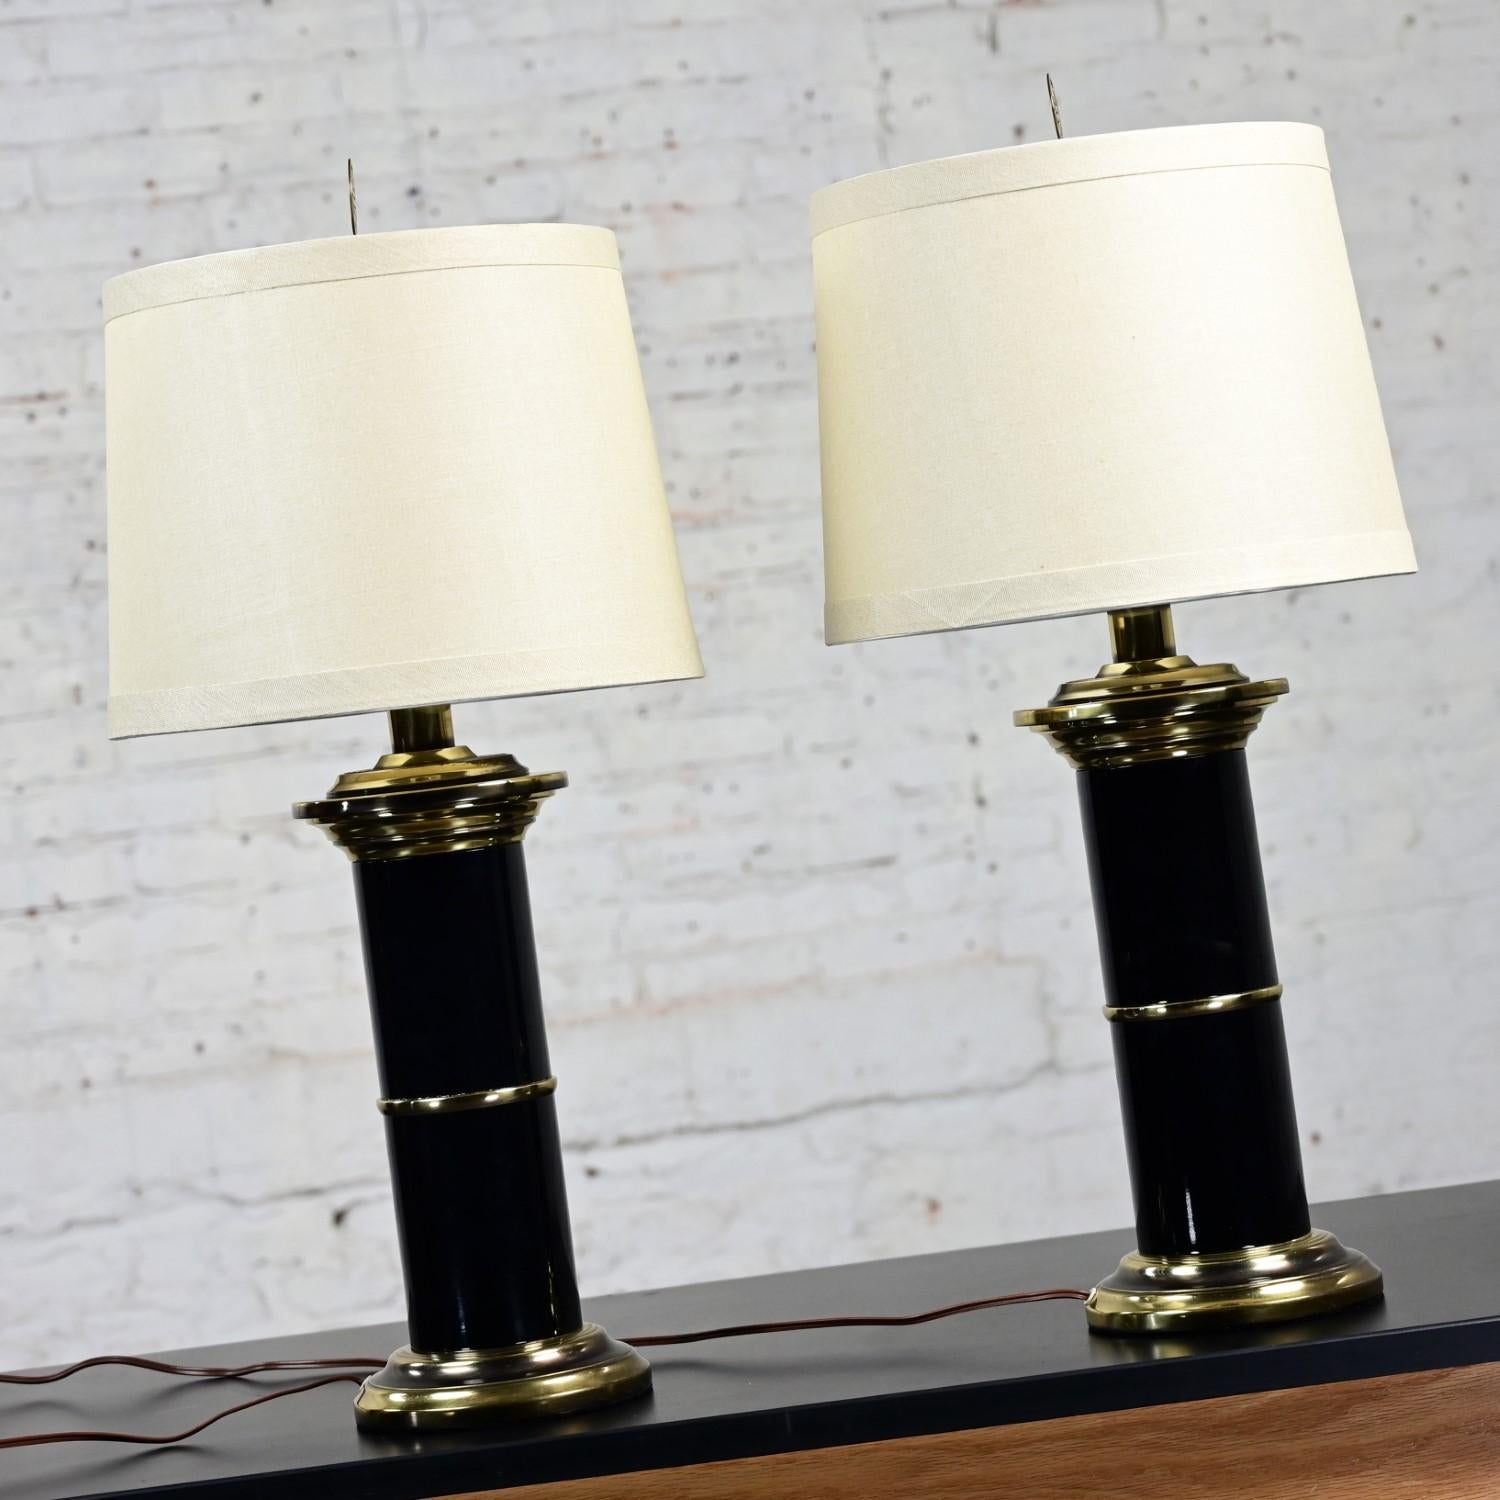 Hollywood Regency Black & Brass Plated Column Table Lamps Asian Finials a Pair For Sale 5